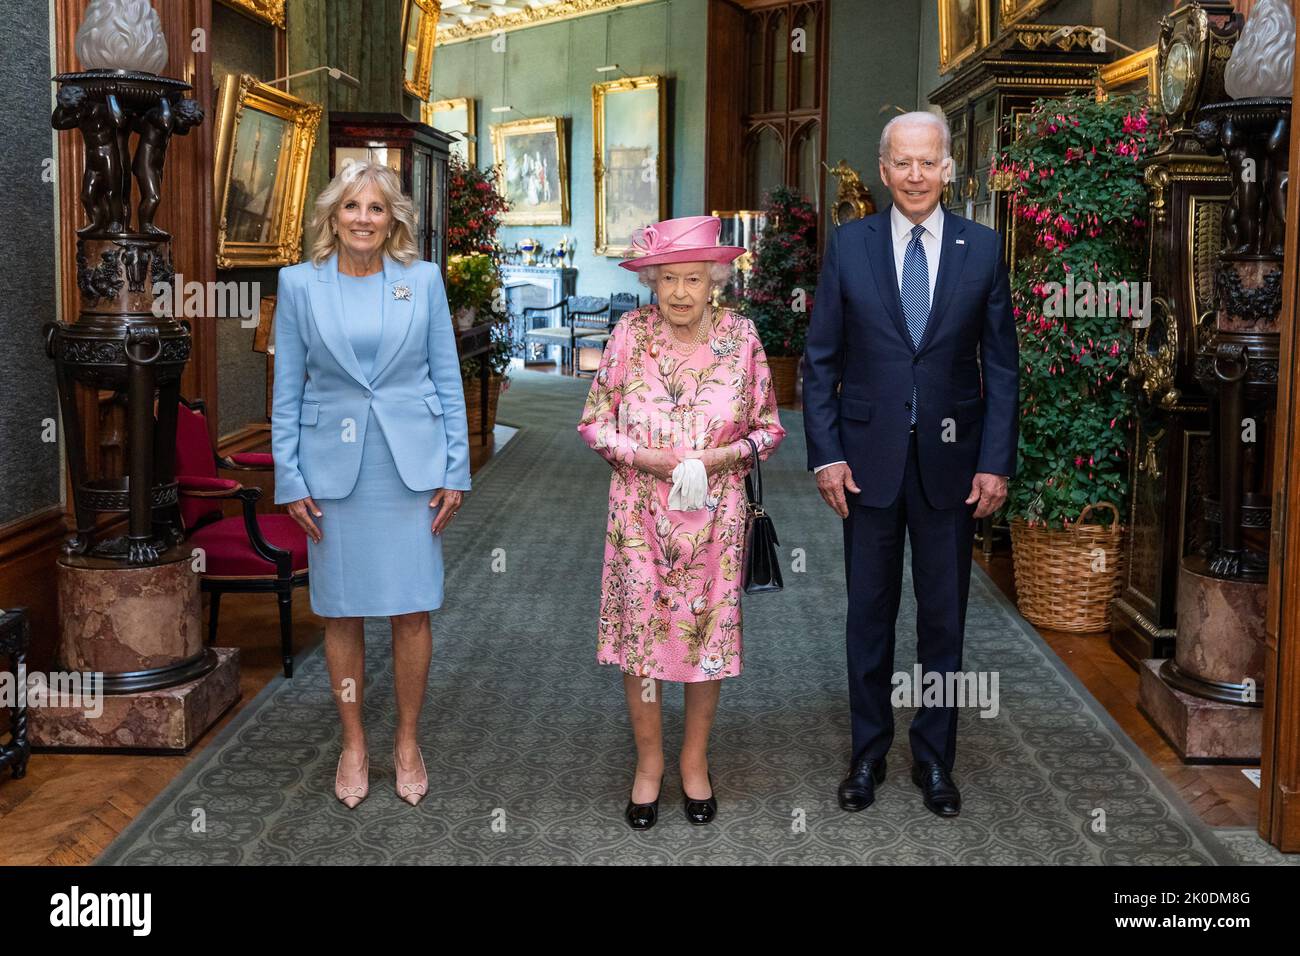 President Joe Biden and First Lady Jill Biden pose for an official photo with Queen Elizabeth II in the Grand Corridor of Windsor Castle Stock Photo